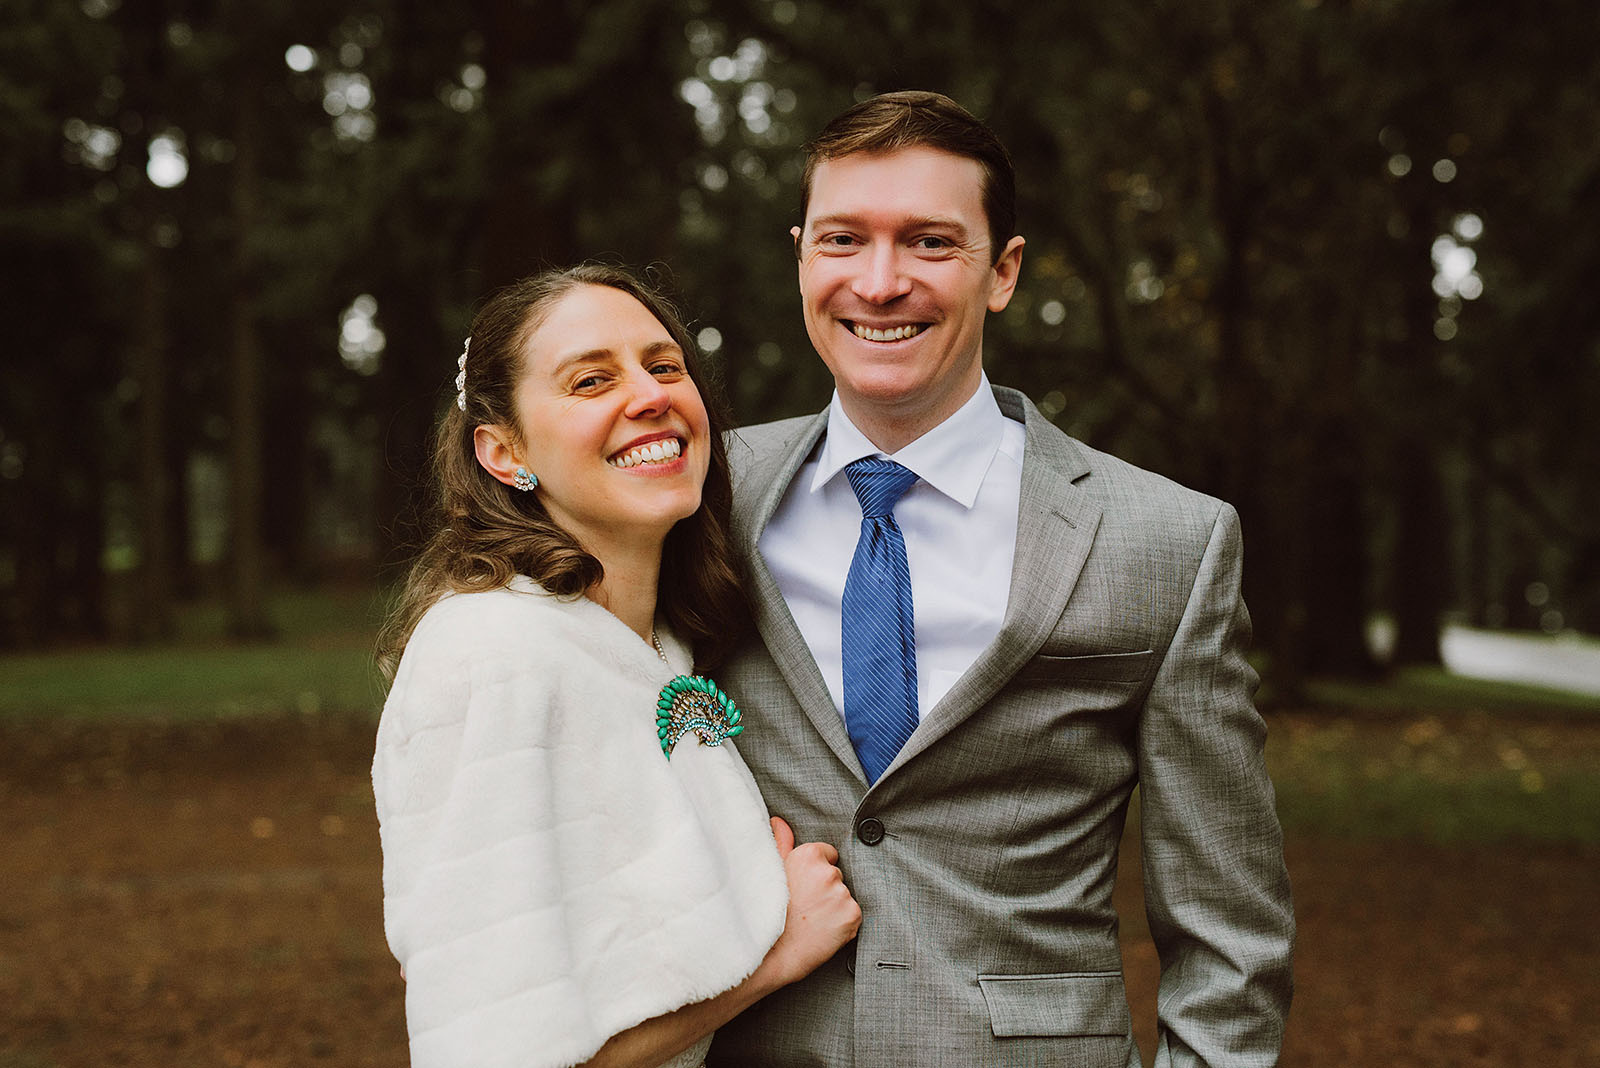 Portraits of Bride and Groom at Mt. Tabor Park